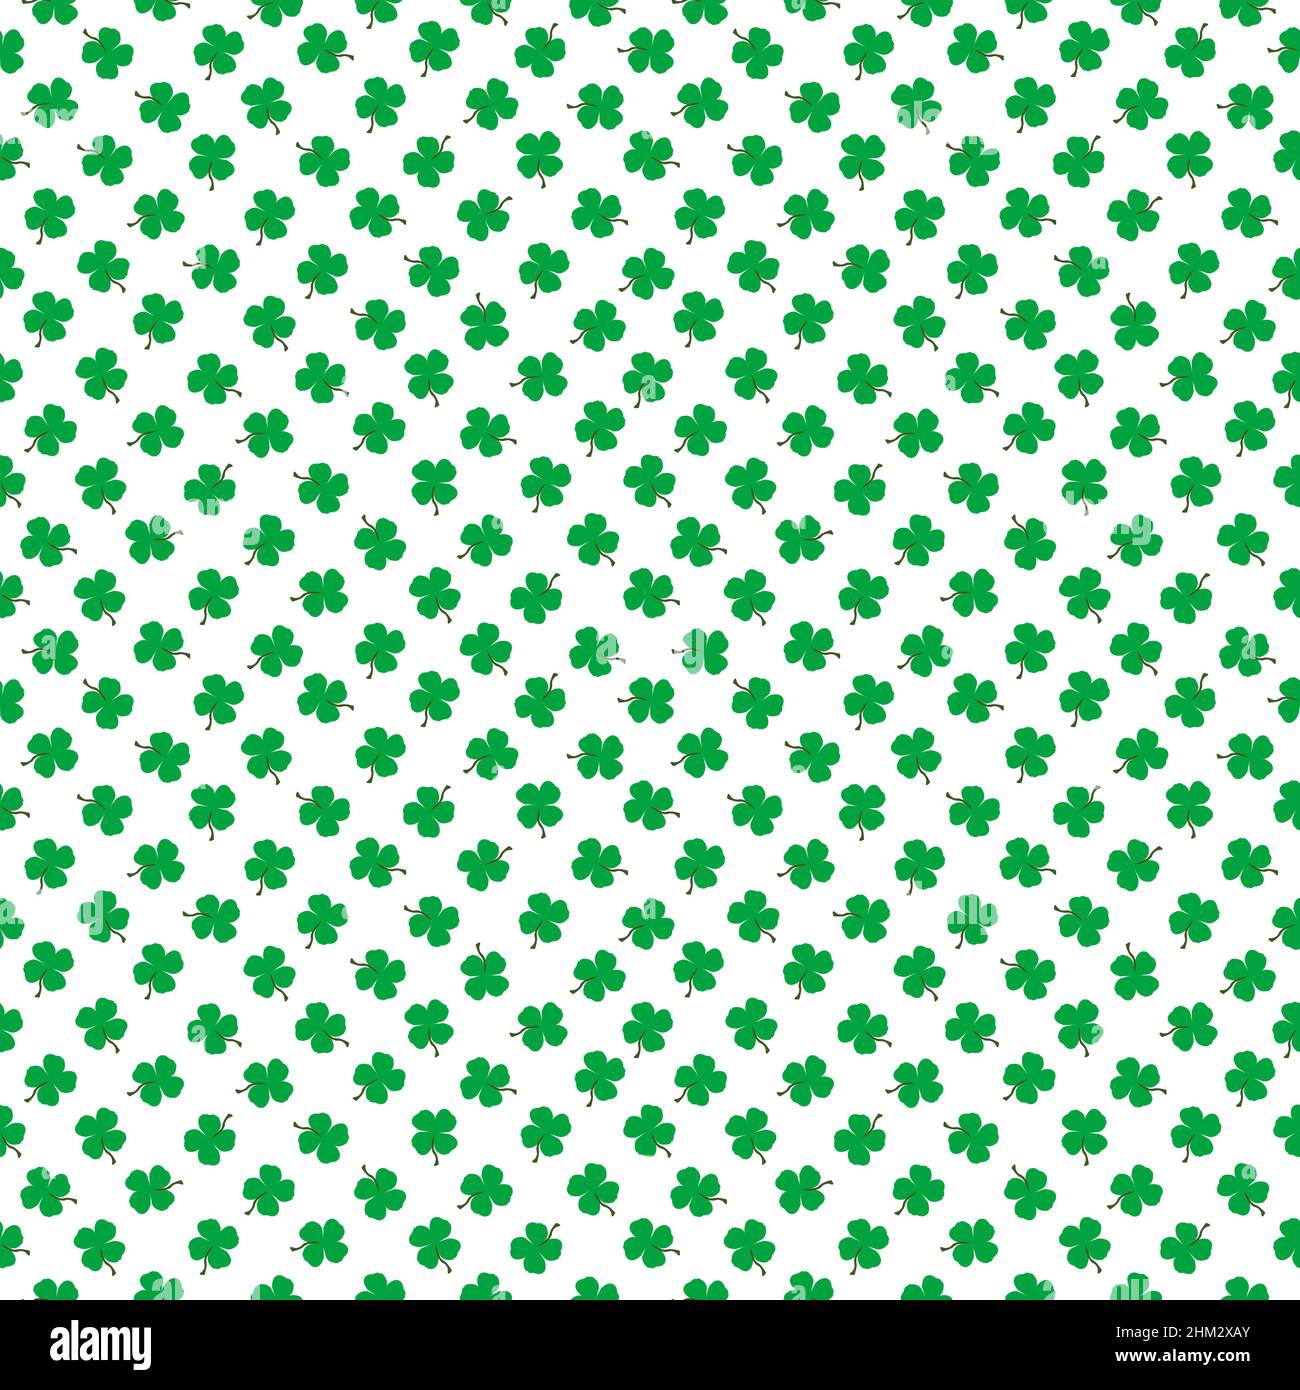 Seamless pattern with clovers on white background in polka dot style Stock Vector